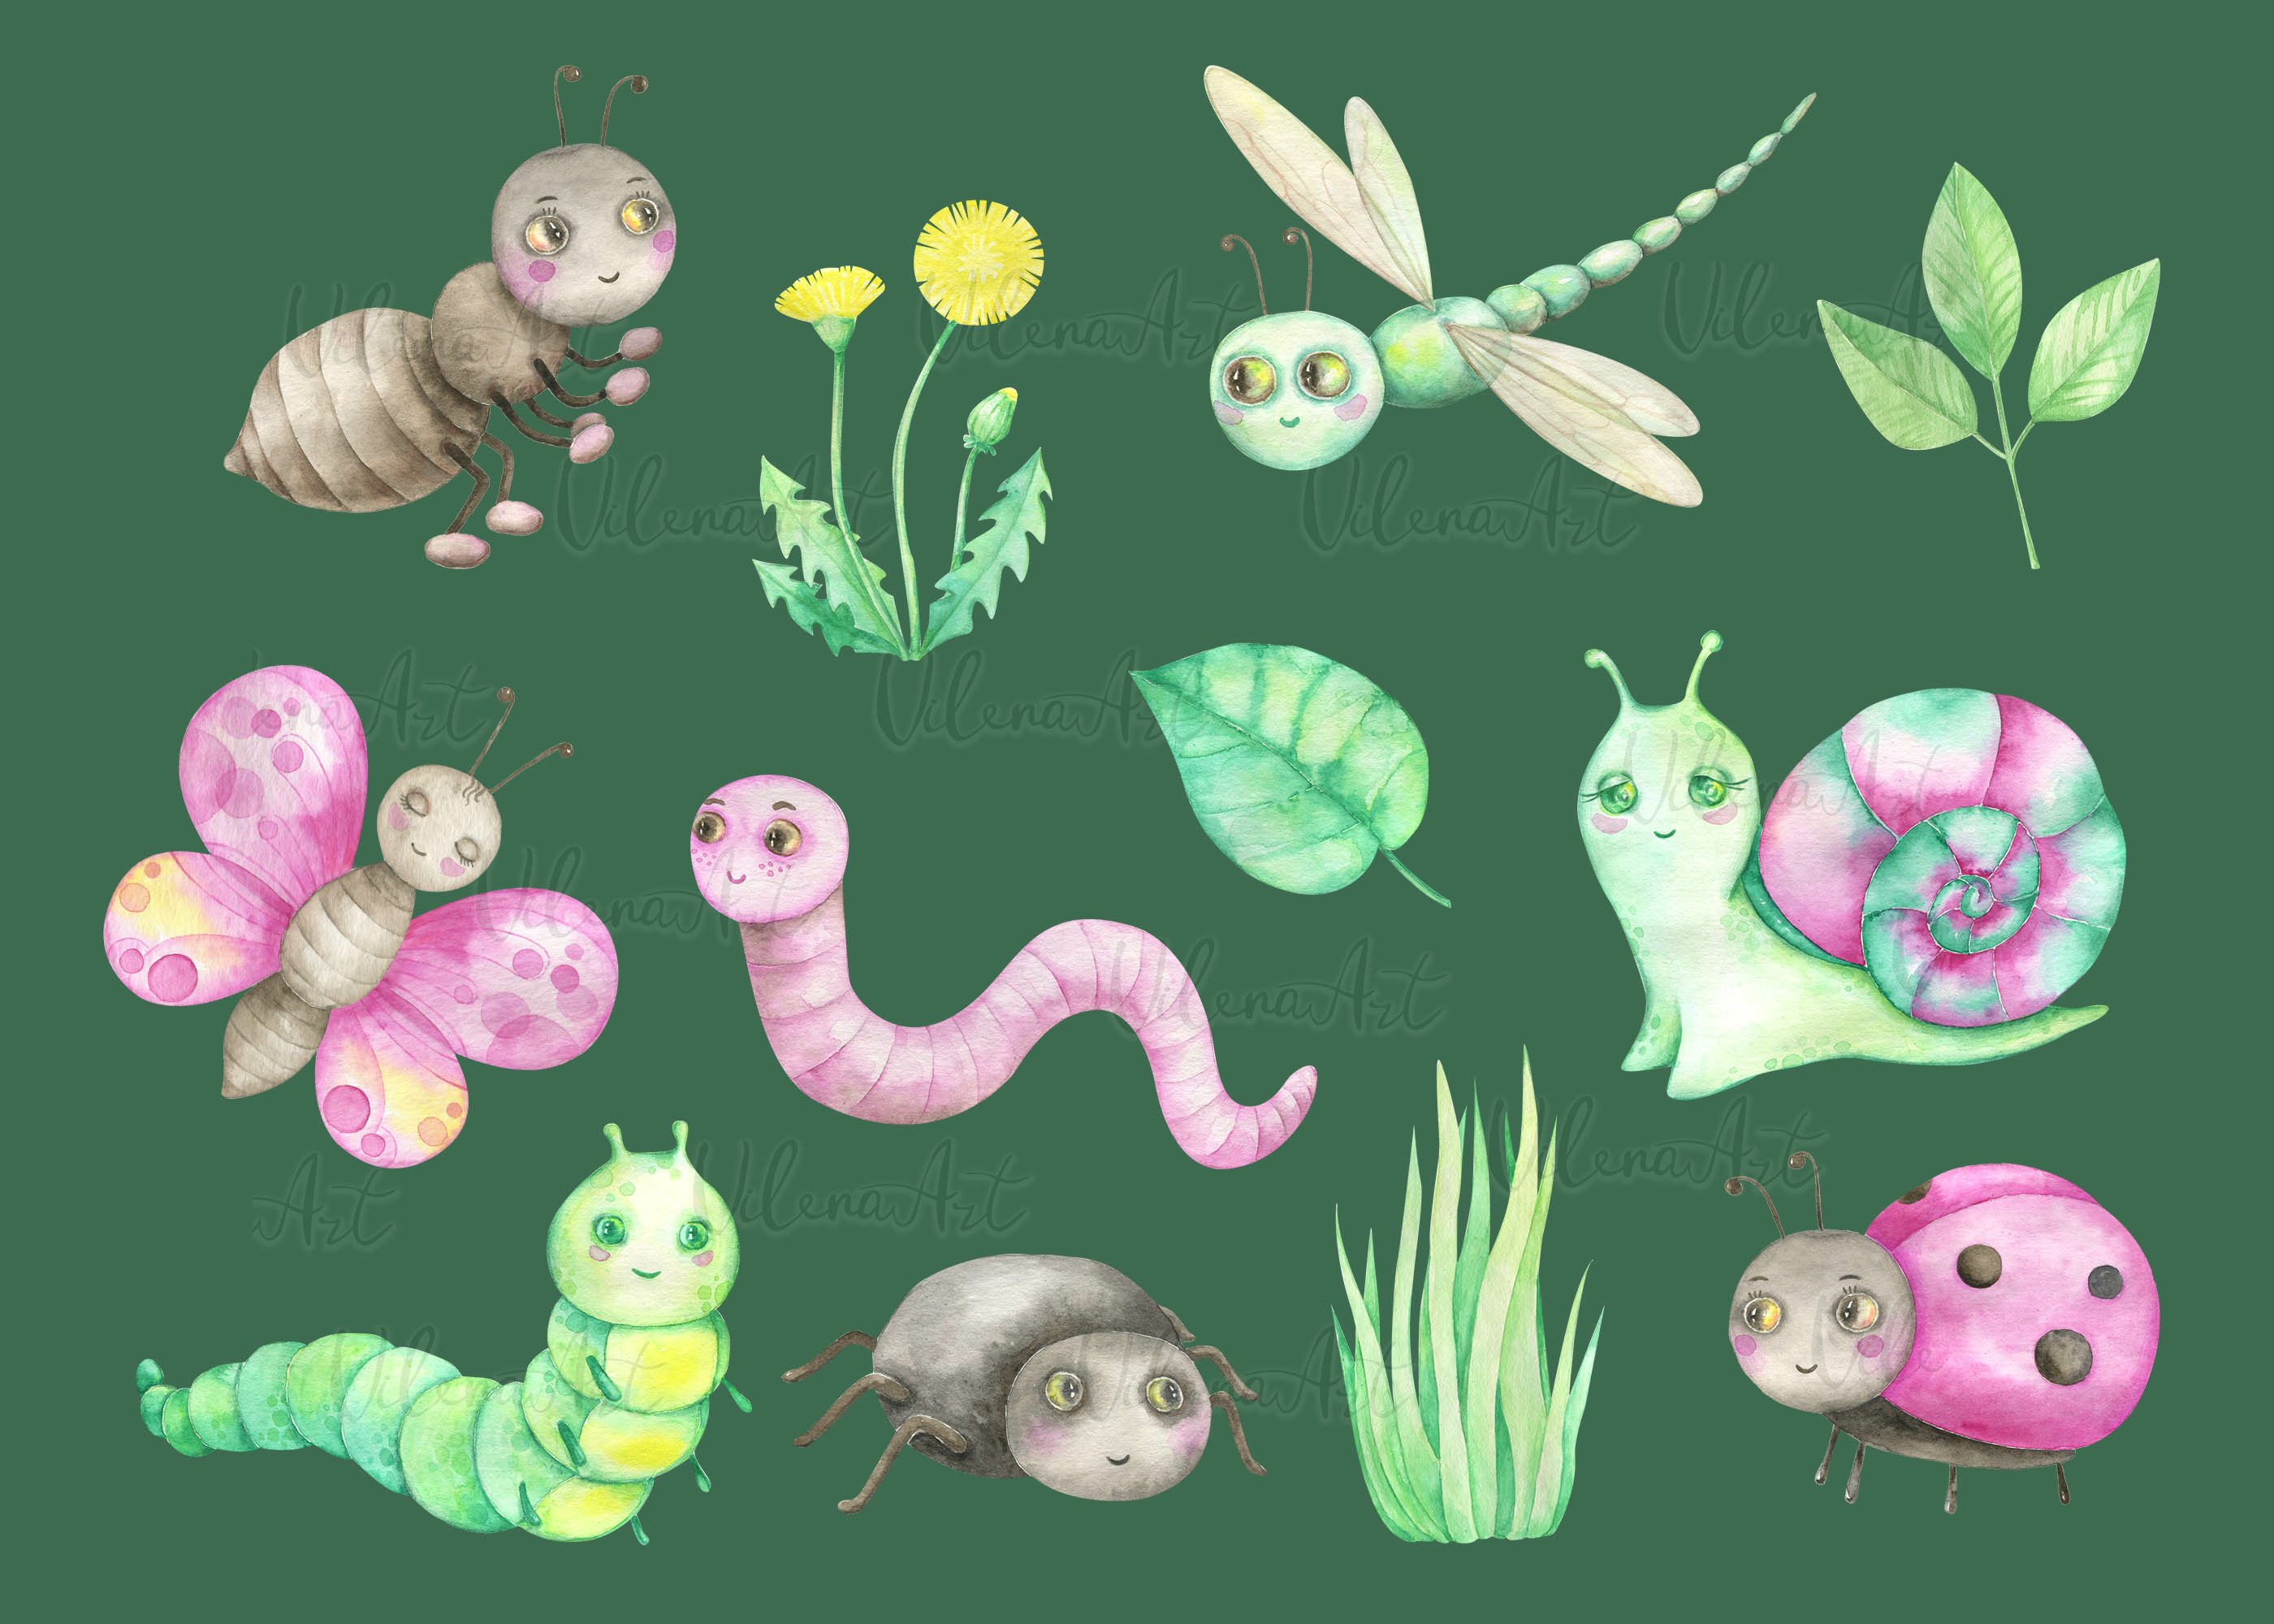 Diverse of insects for cool illustration.